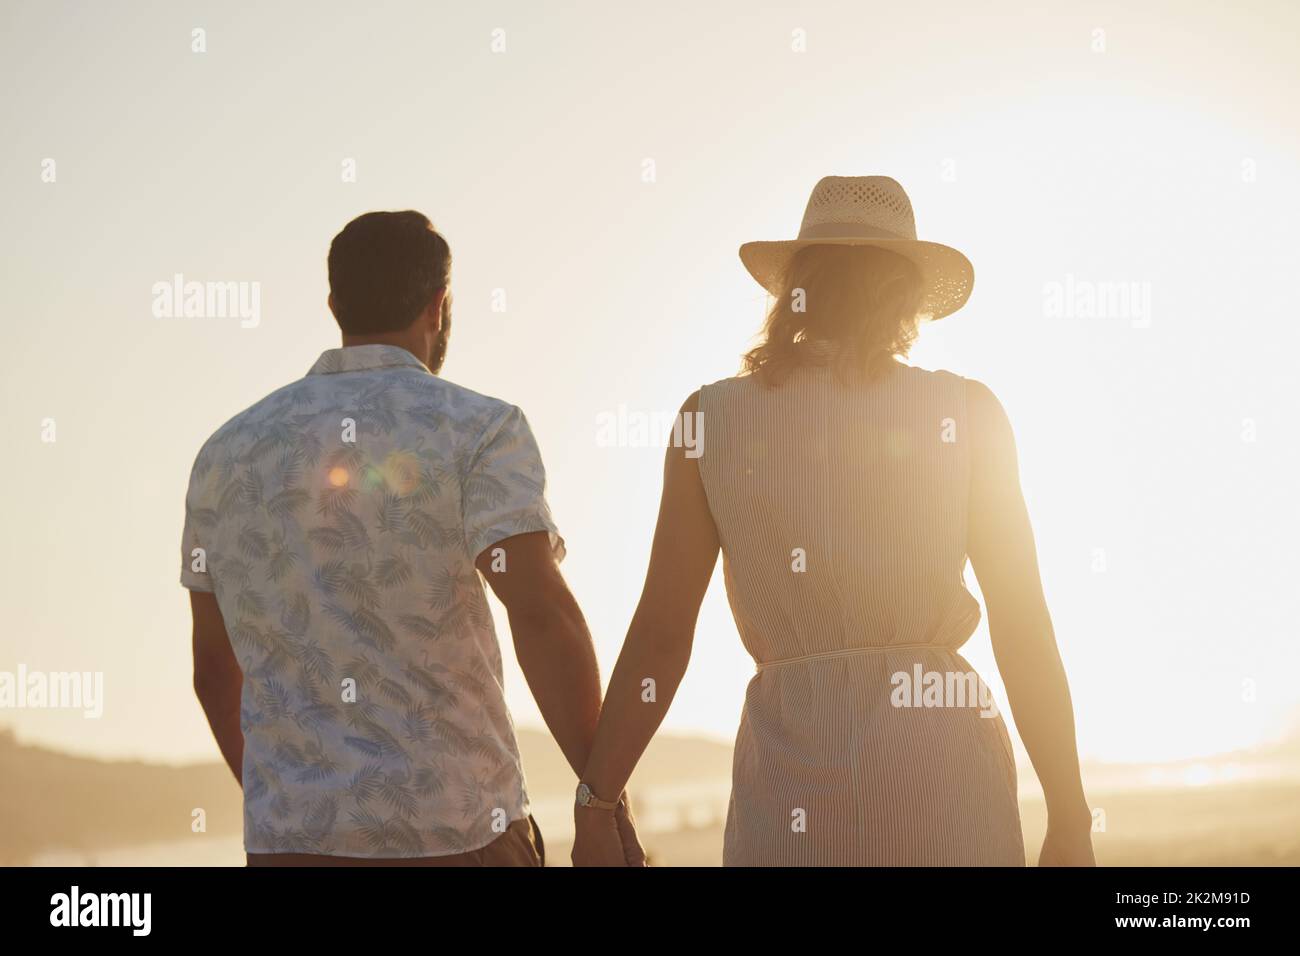 Let's go to a place where we'll feel at peace Stock Photo